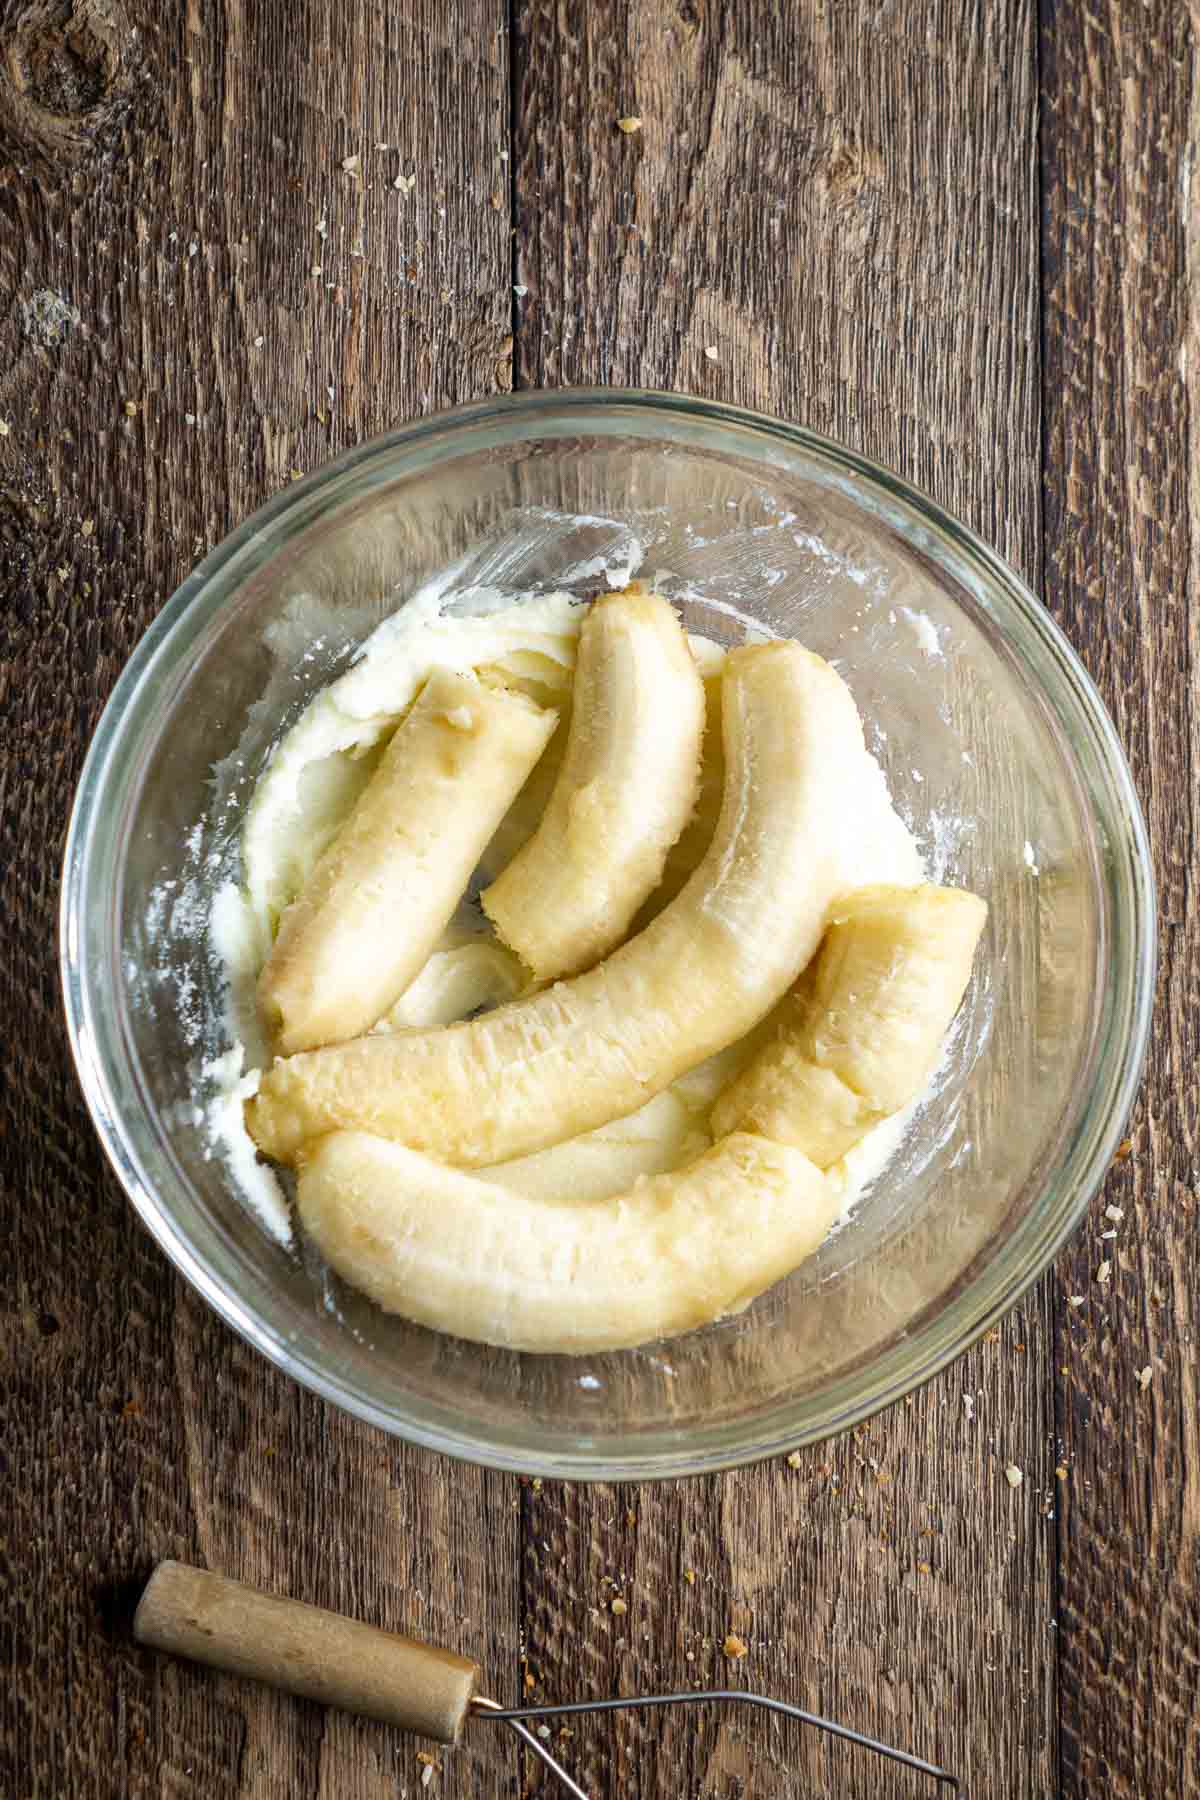 butter, sugar, and bananas in glass mixing bowl